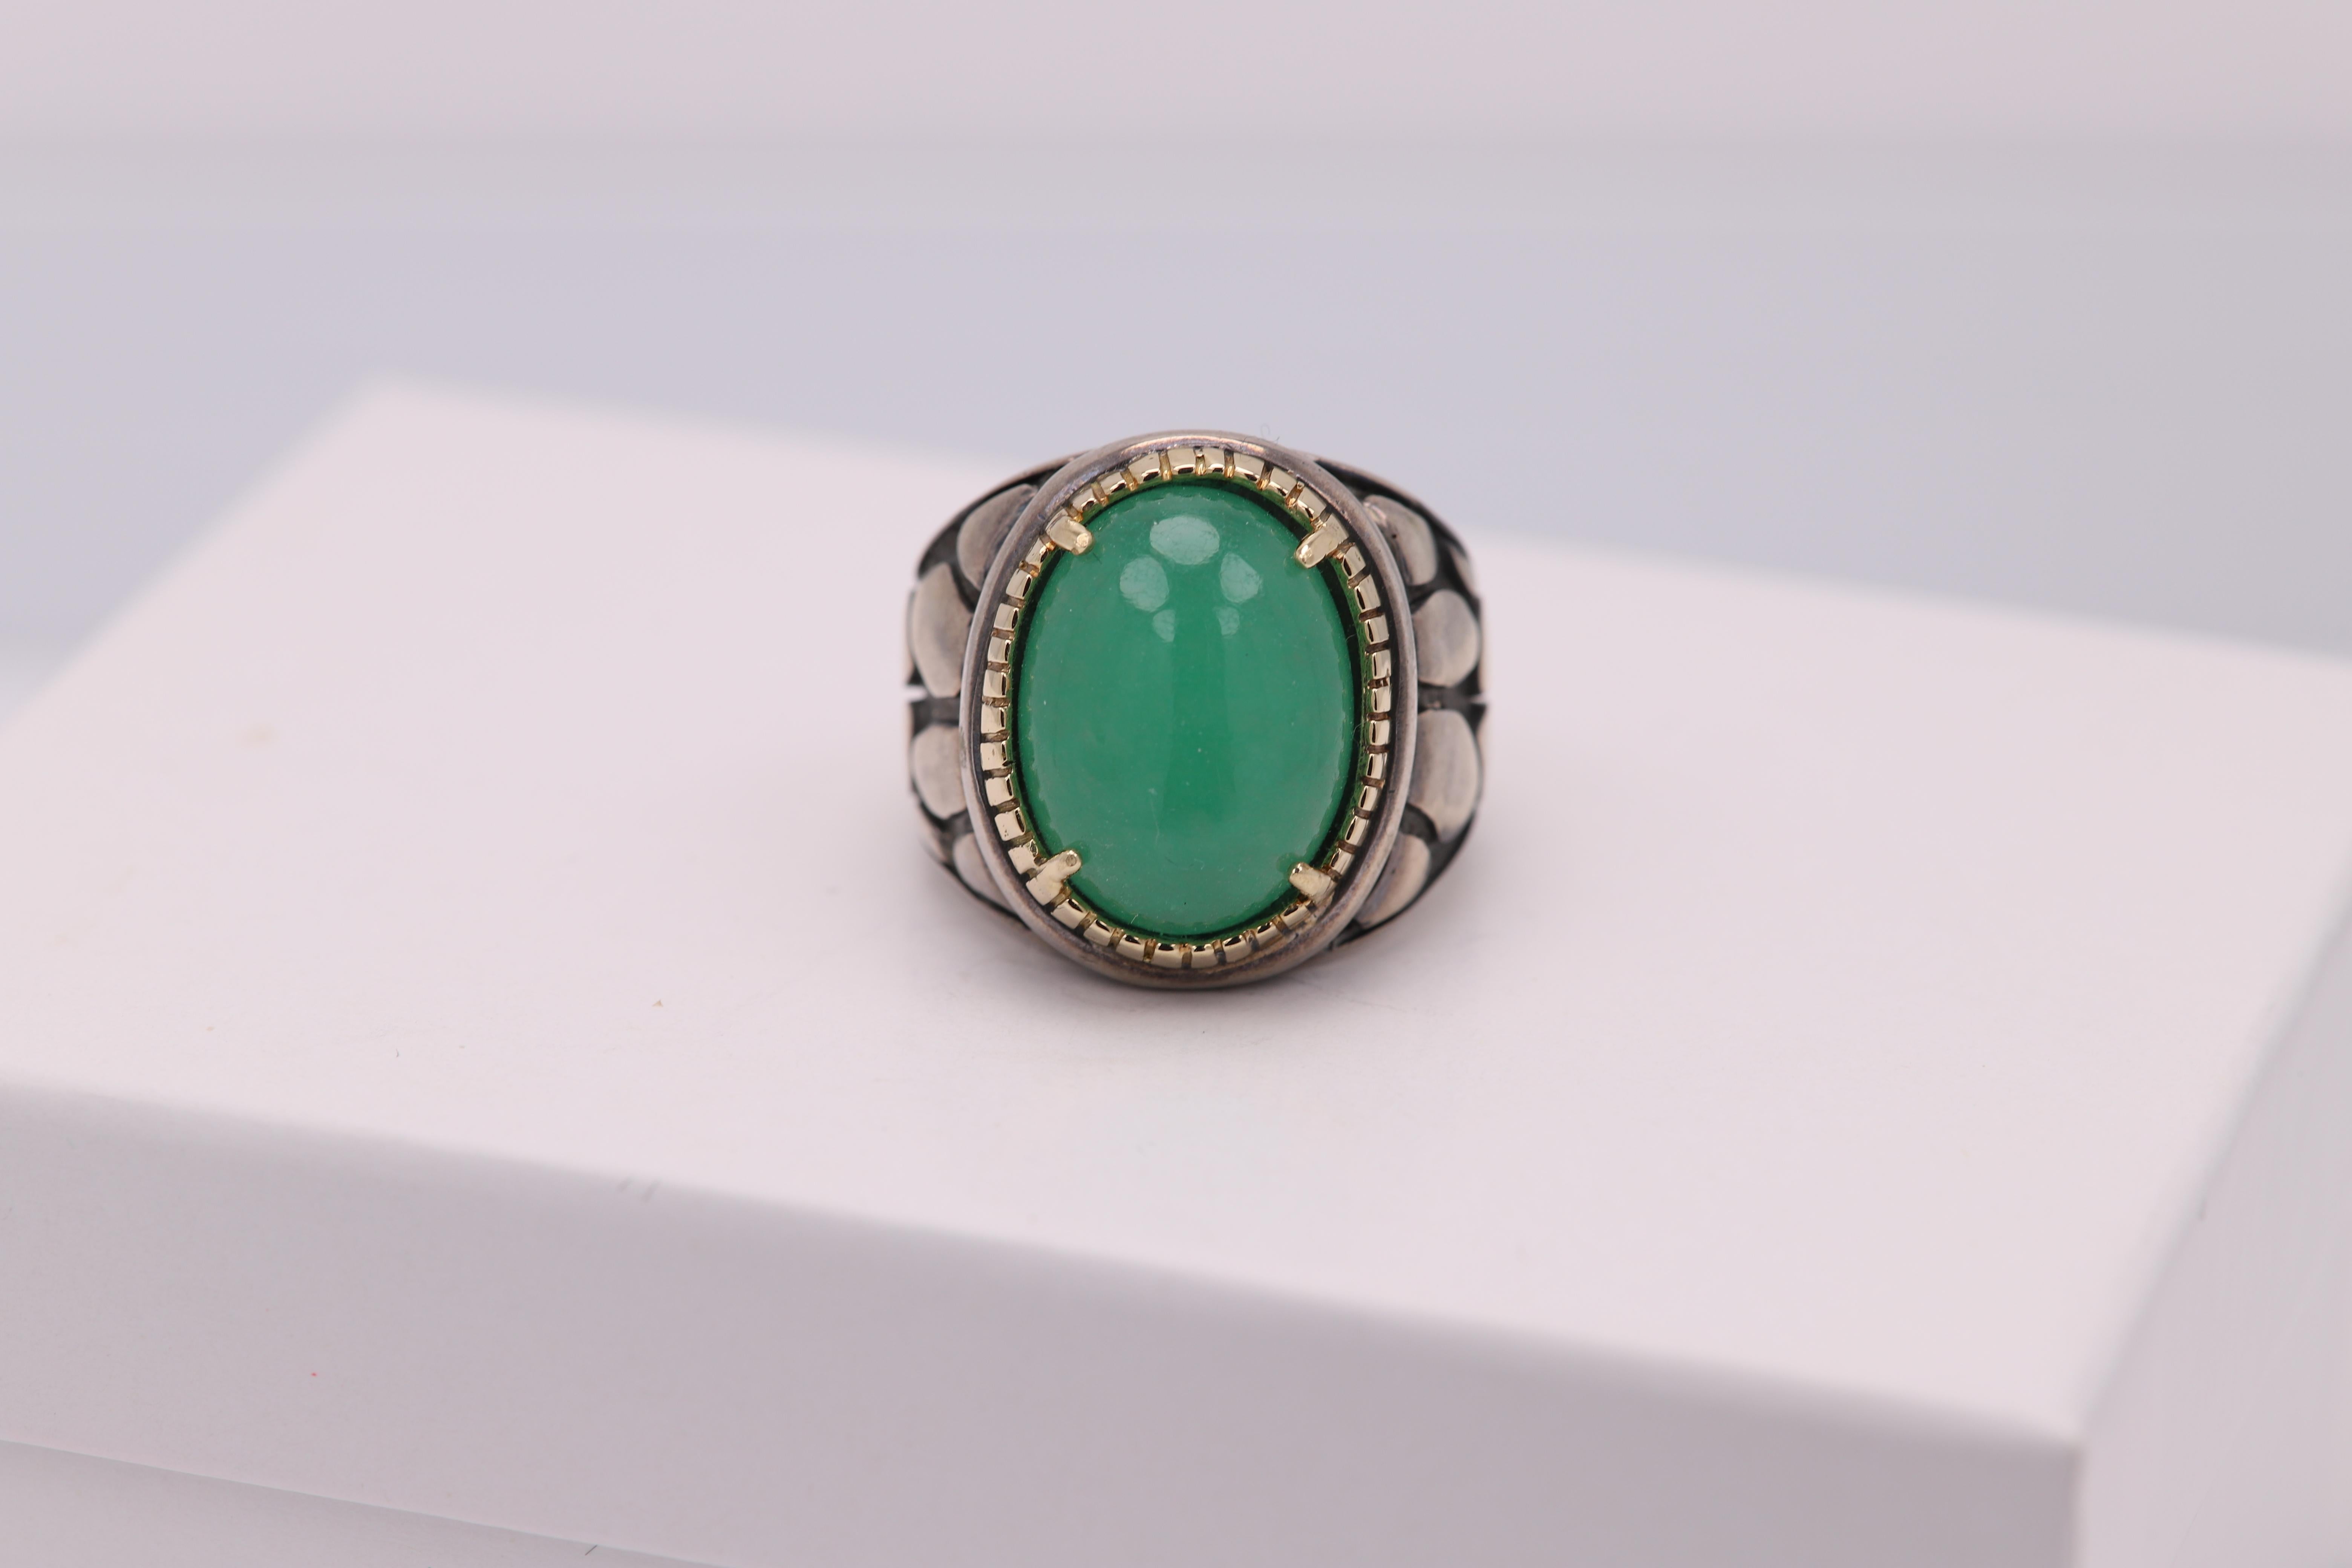 Cabochon Treated Jade Ring Sterling Silver 925 and 18 Karat Gold Green Jade Jewelry